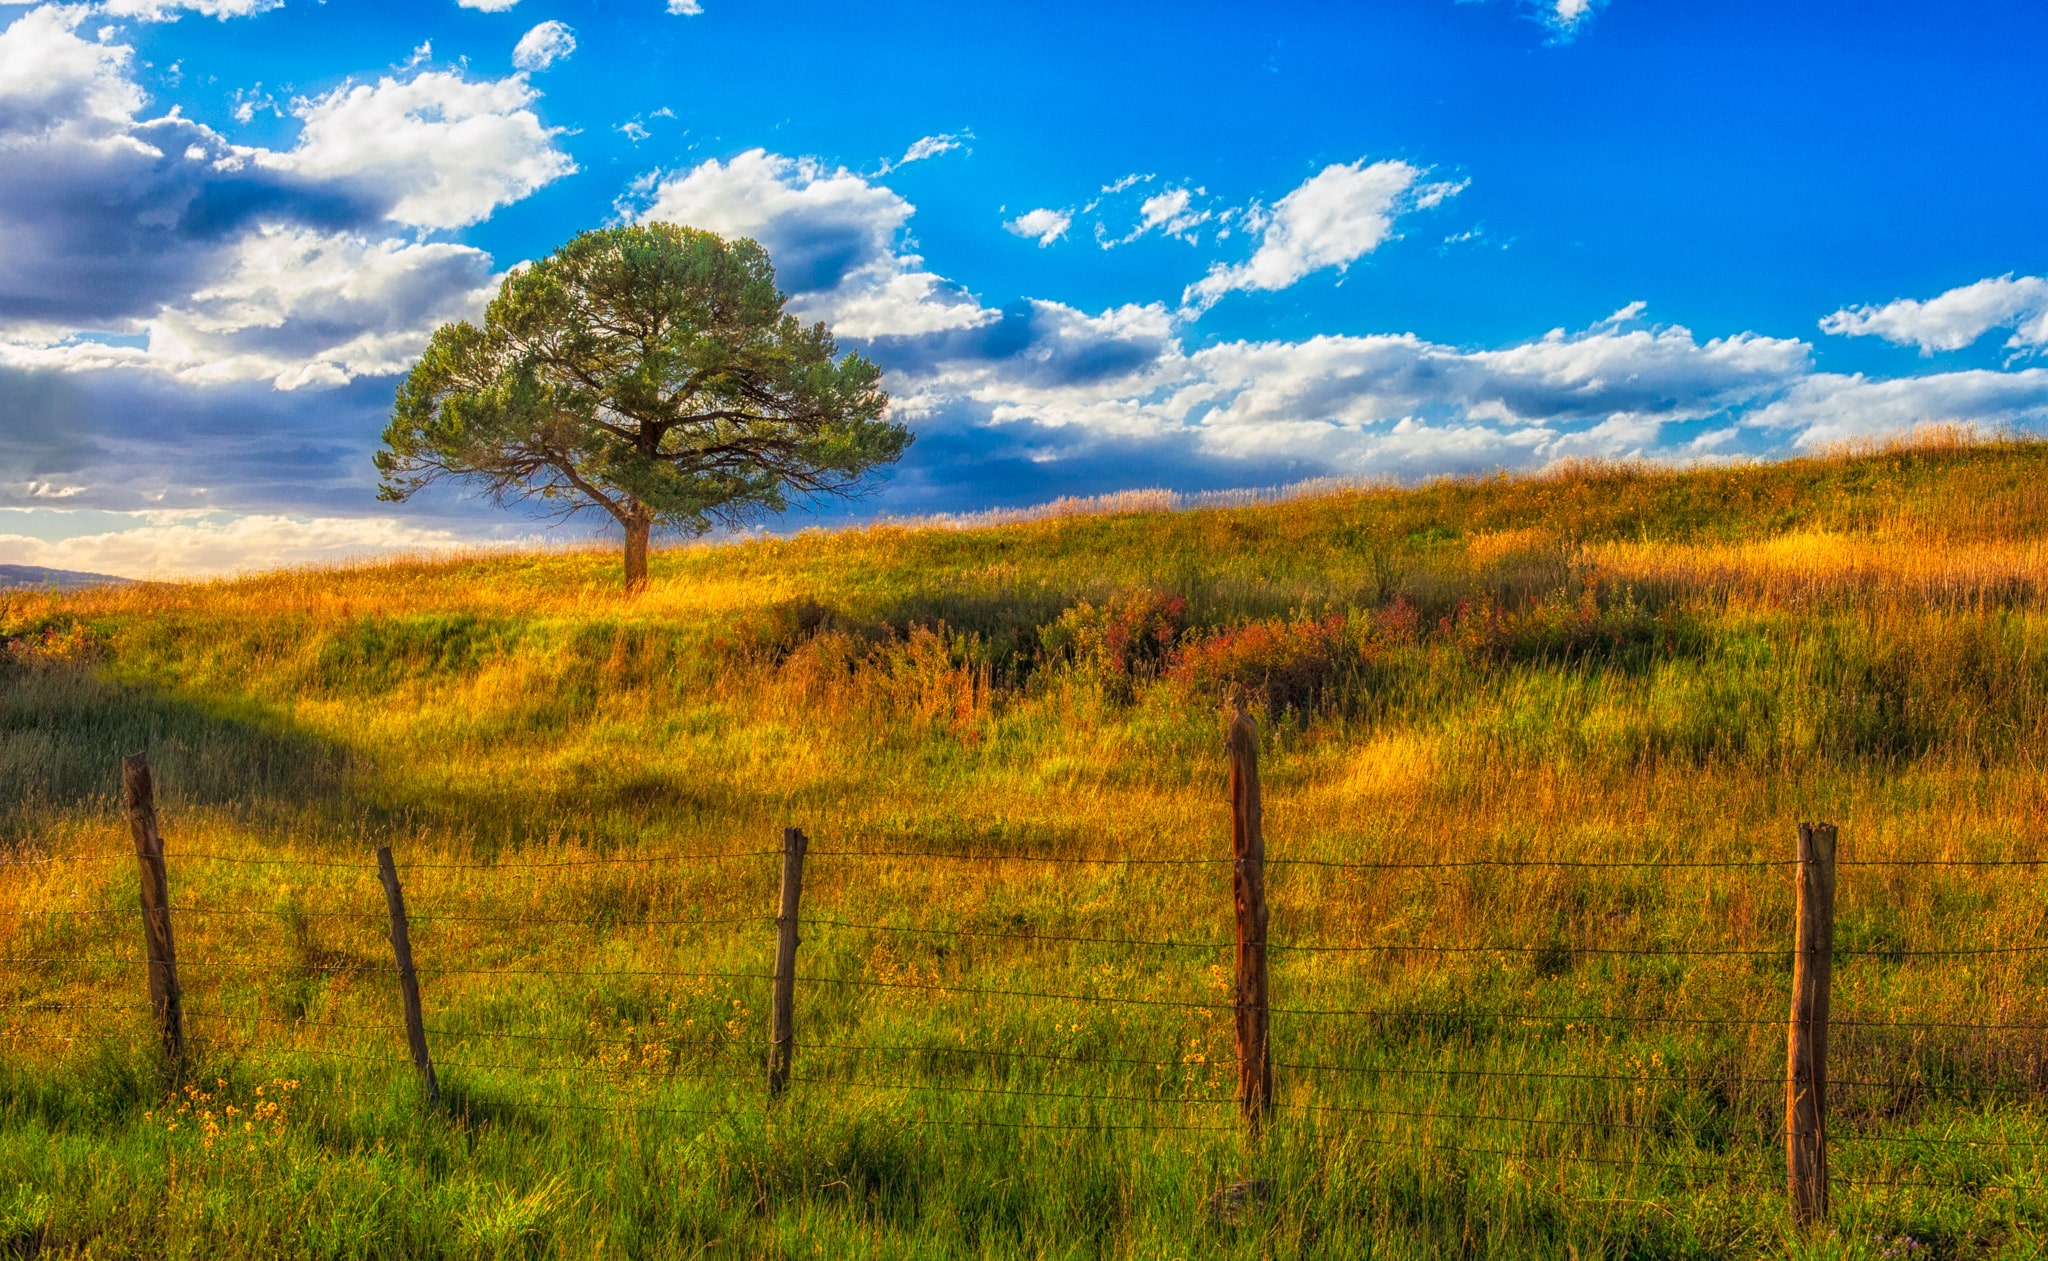 A Lone tree stands in a field of autumn-colored grasses, fenced in by a barb-wire fence.